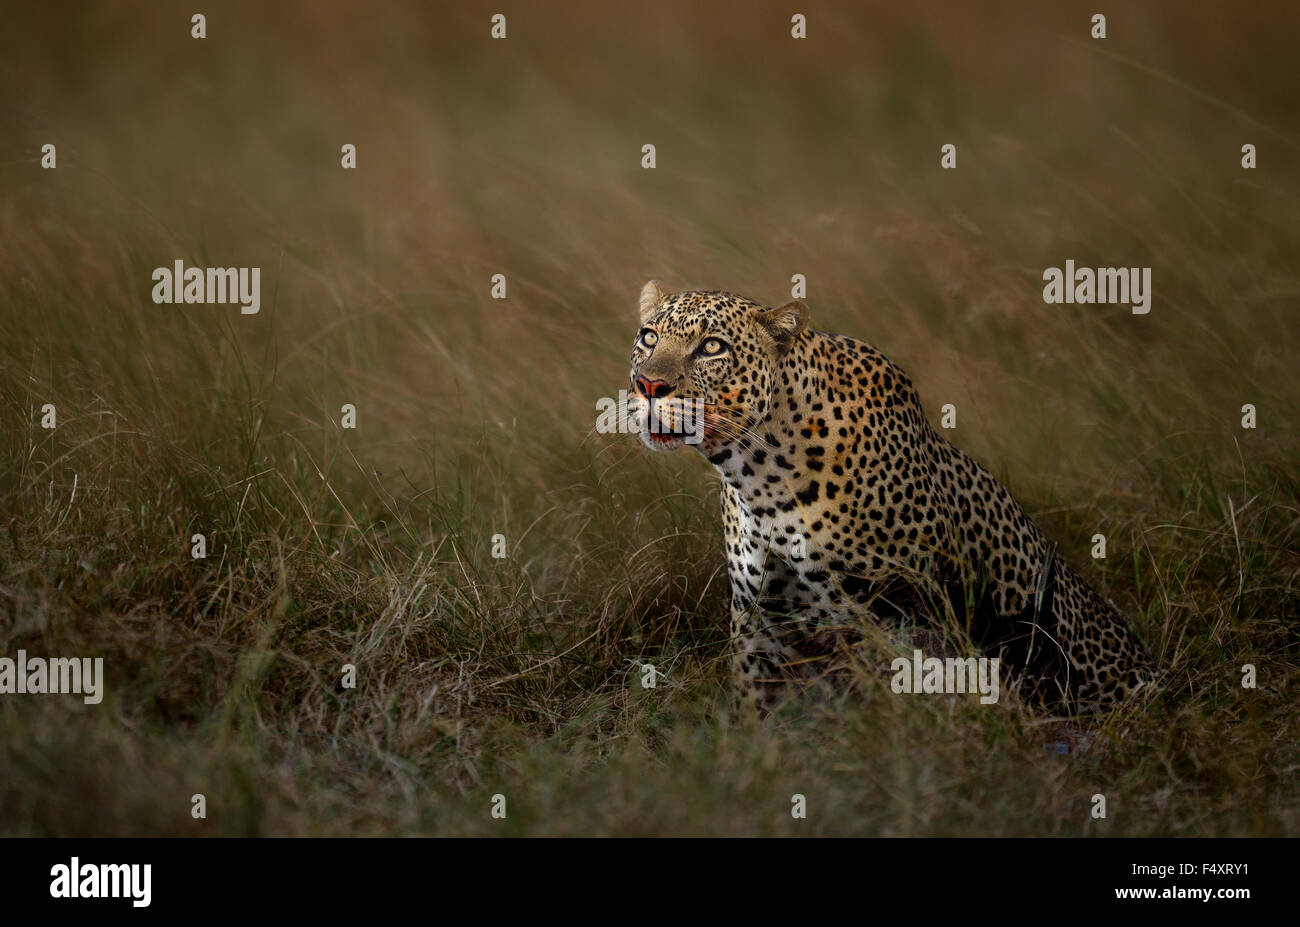 LEOPARD AND BLOOD ! Leopard's best photo captured ! Stock Photo